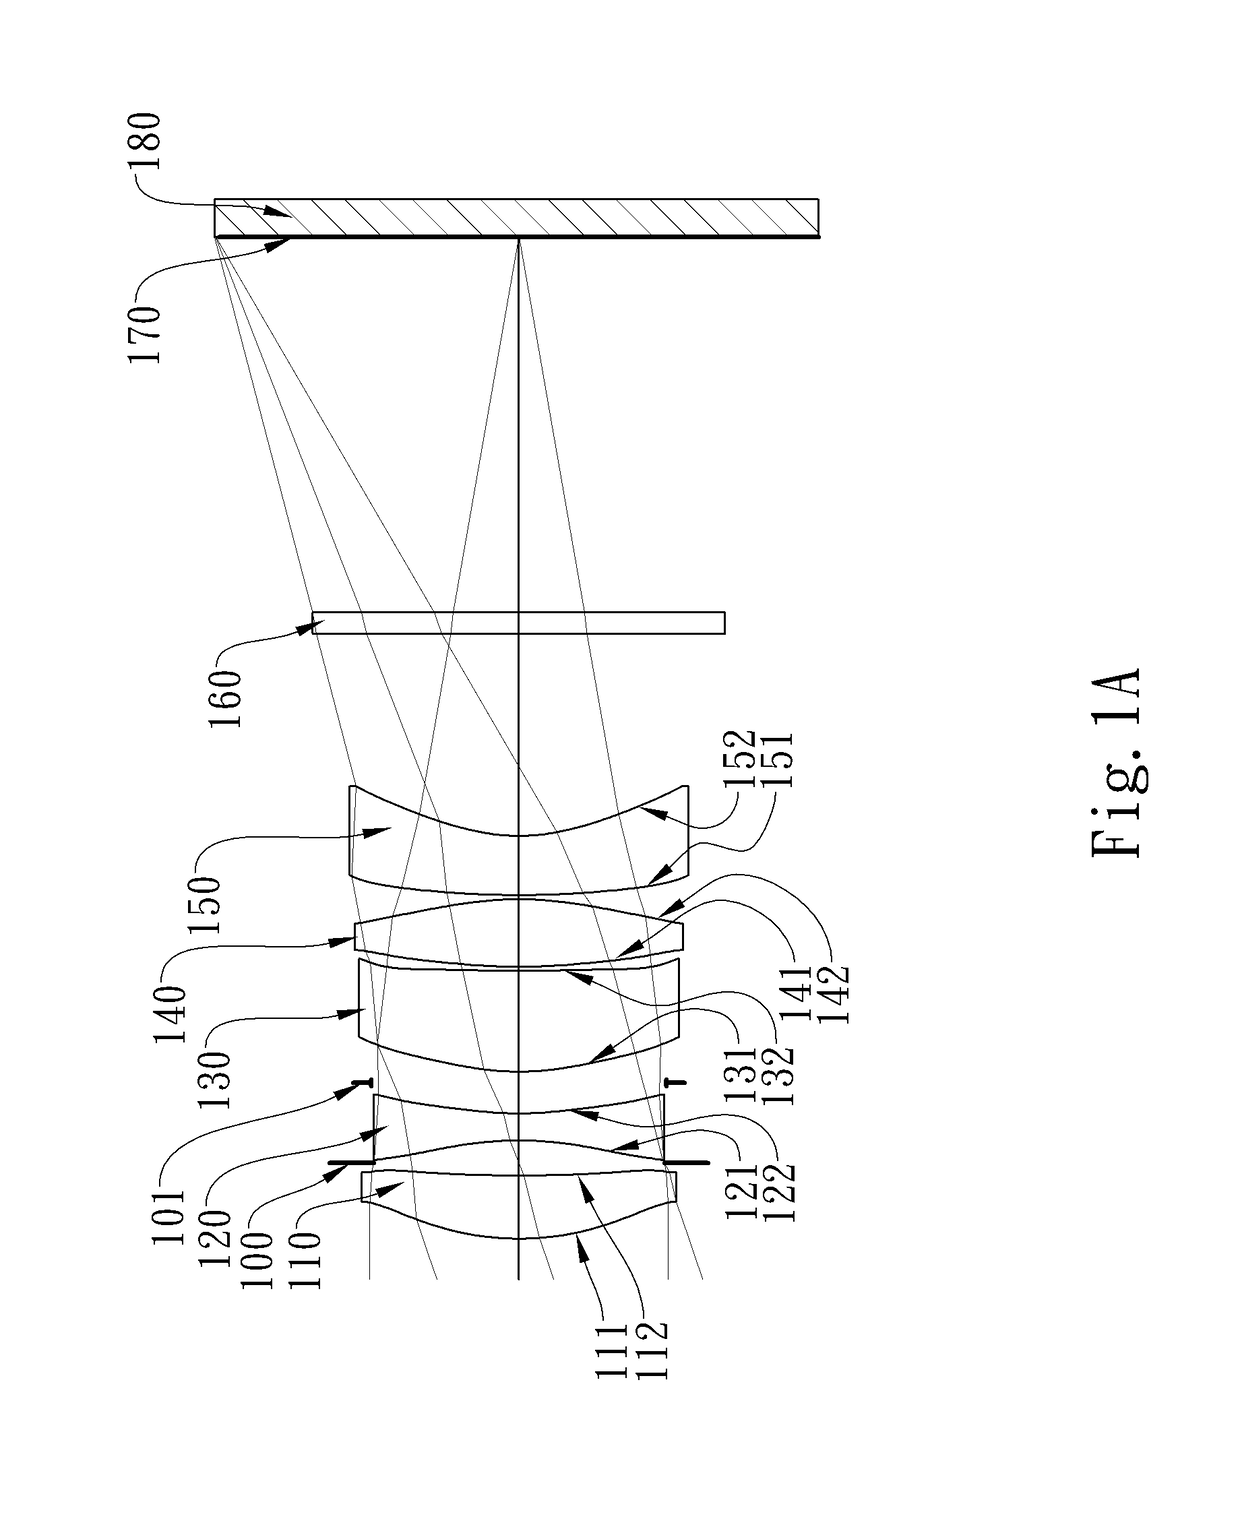 Optical imaging system, imaging apparatus and electronic device